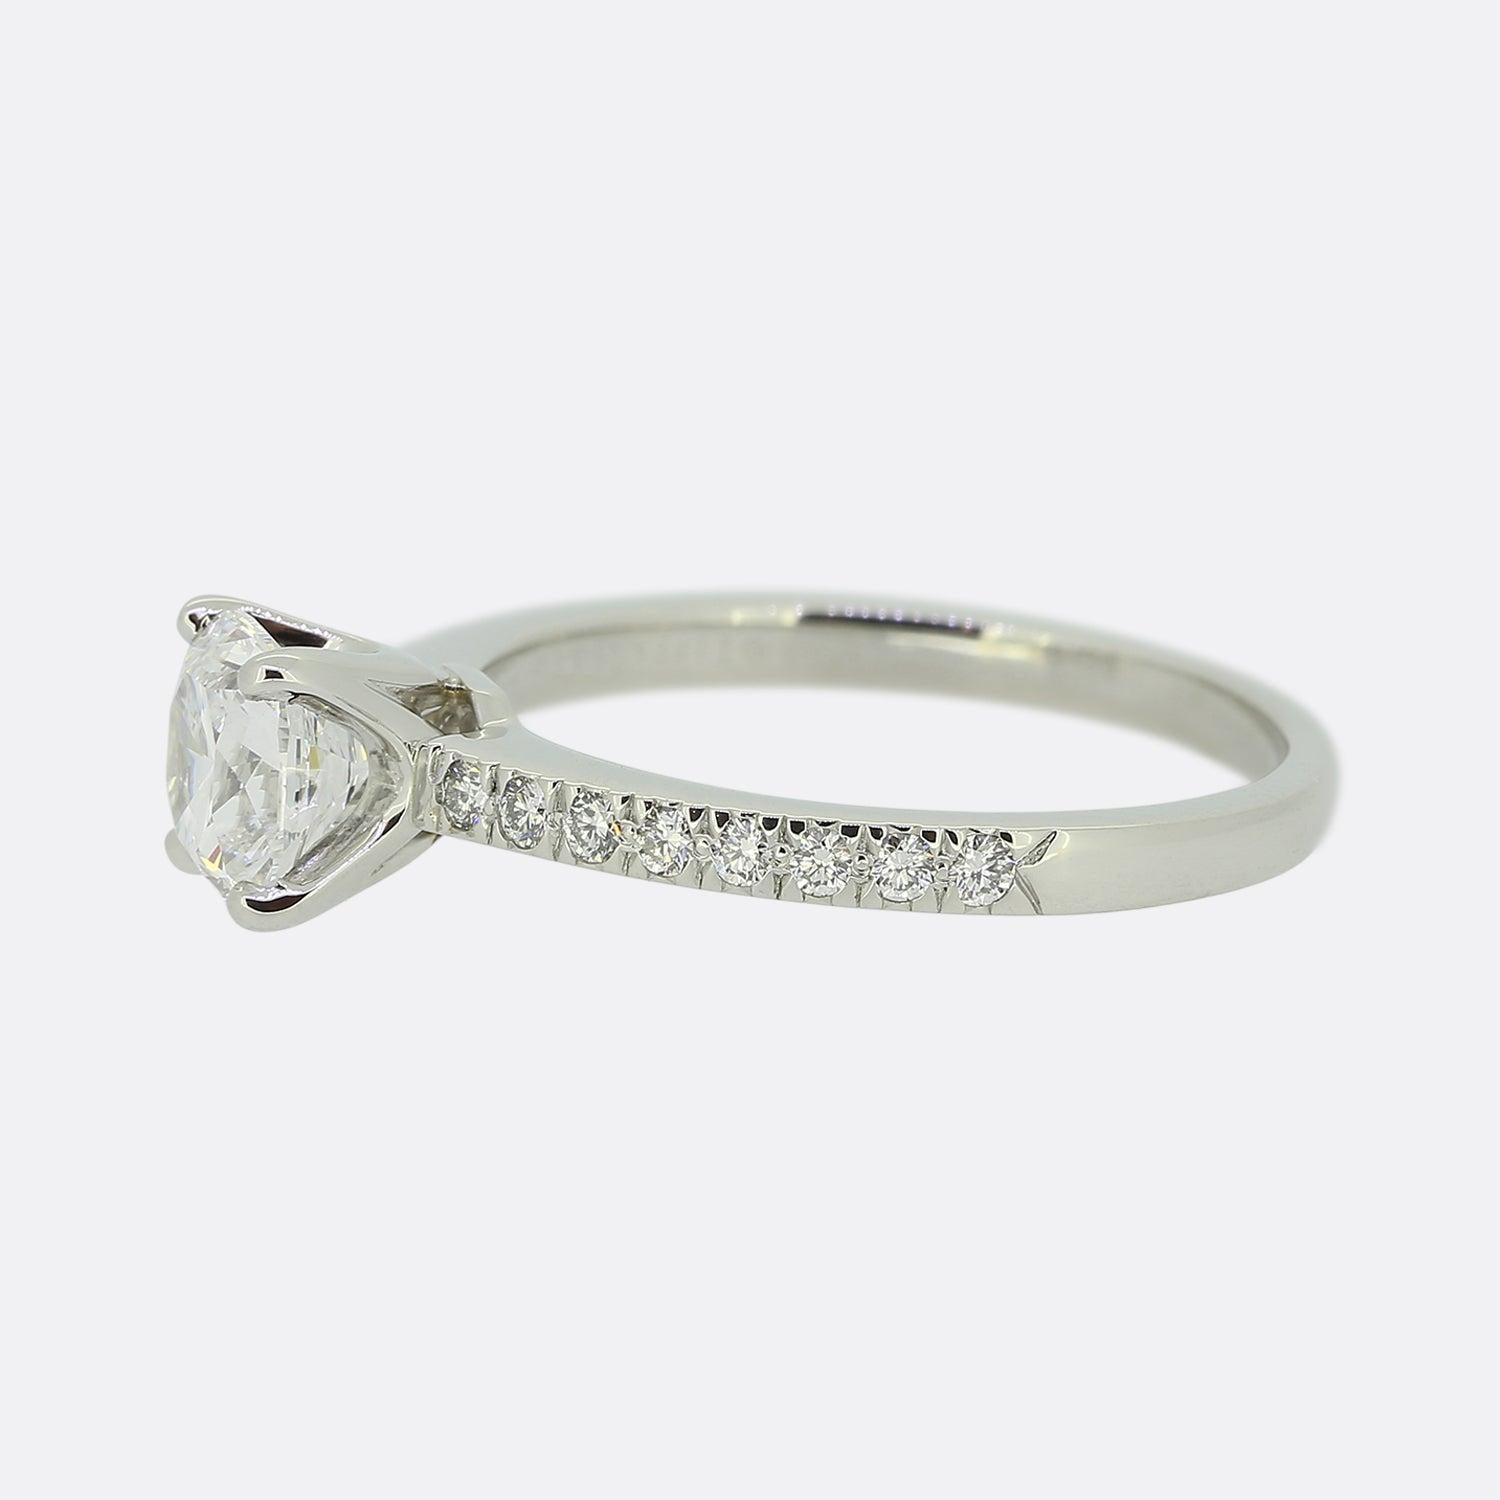 Here we have a 'Novo' diamond solitaire engagement ring from the world renowned luxury jewellery designers, Tiffany & Co. The centre stone is a 1.04 carat square cushion cut diamond which sits proud in a four clawed setting and is flanked on either